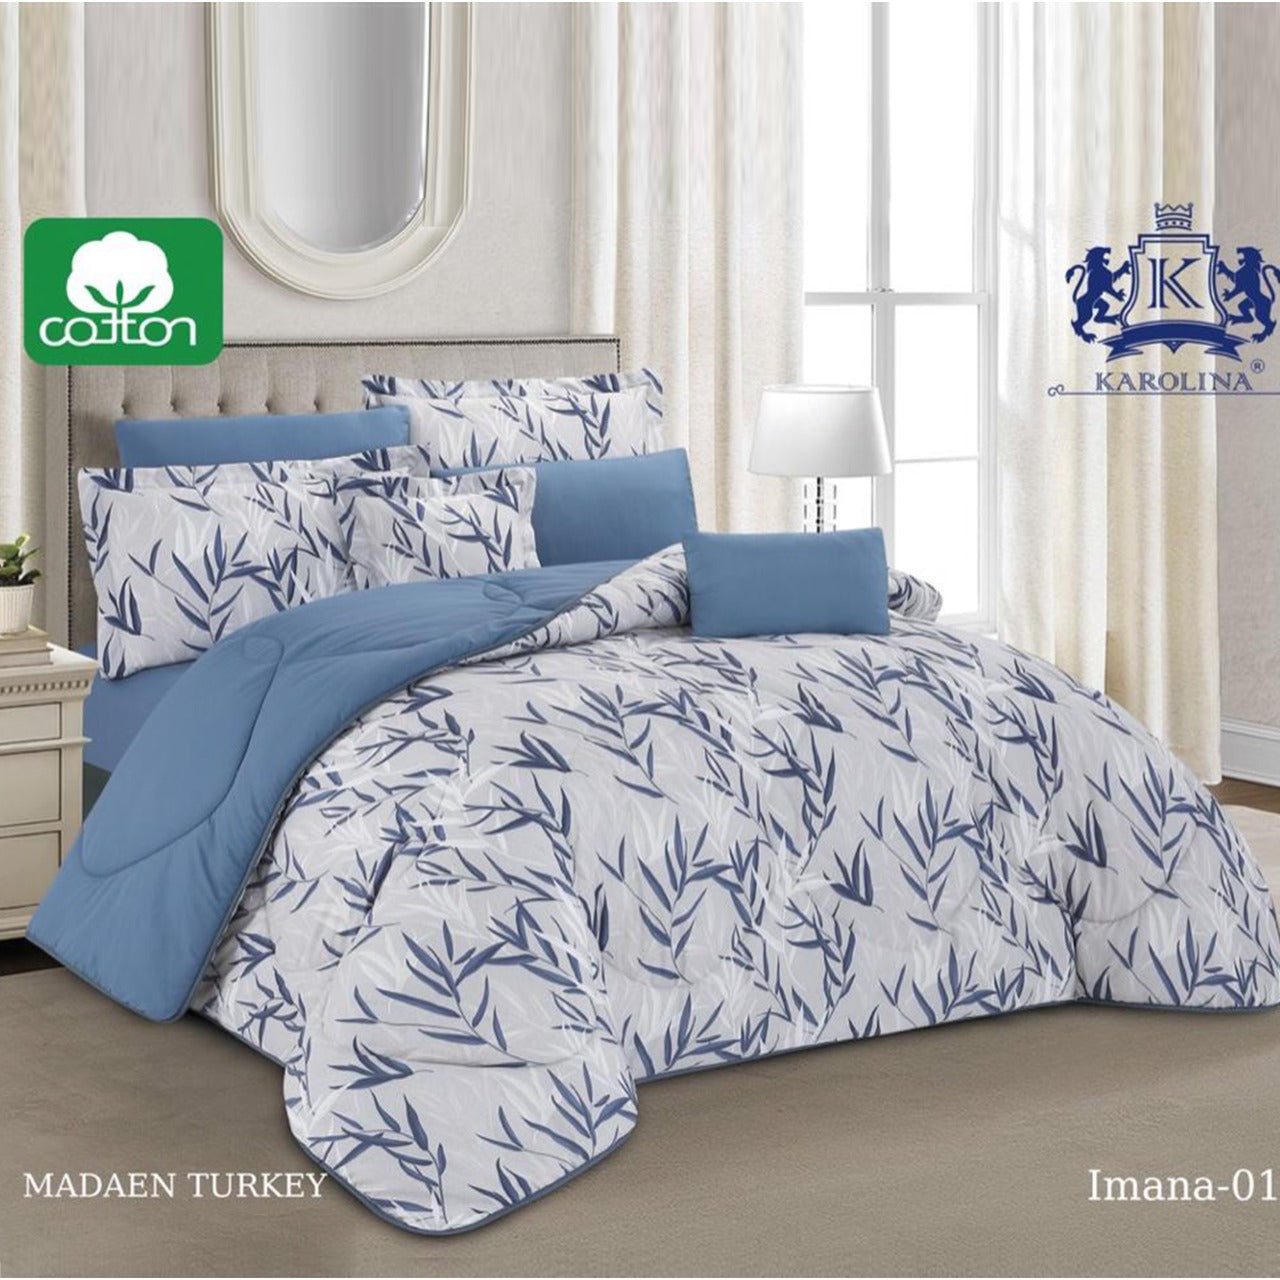 10 Piece Comforter Bedding With Sheet and Decorative Pillow Shams | Made in Turkey Imana-01 Zaappy